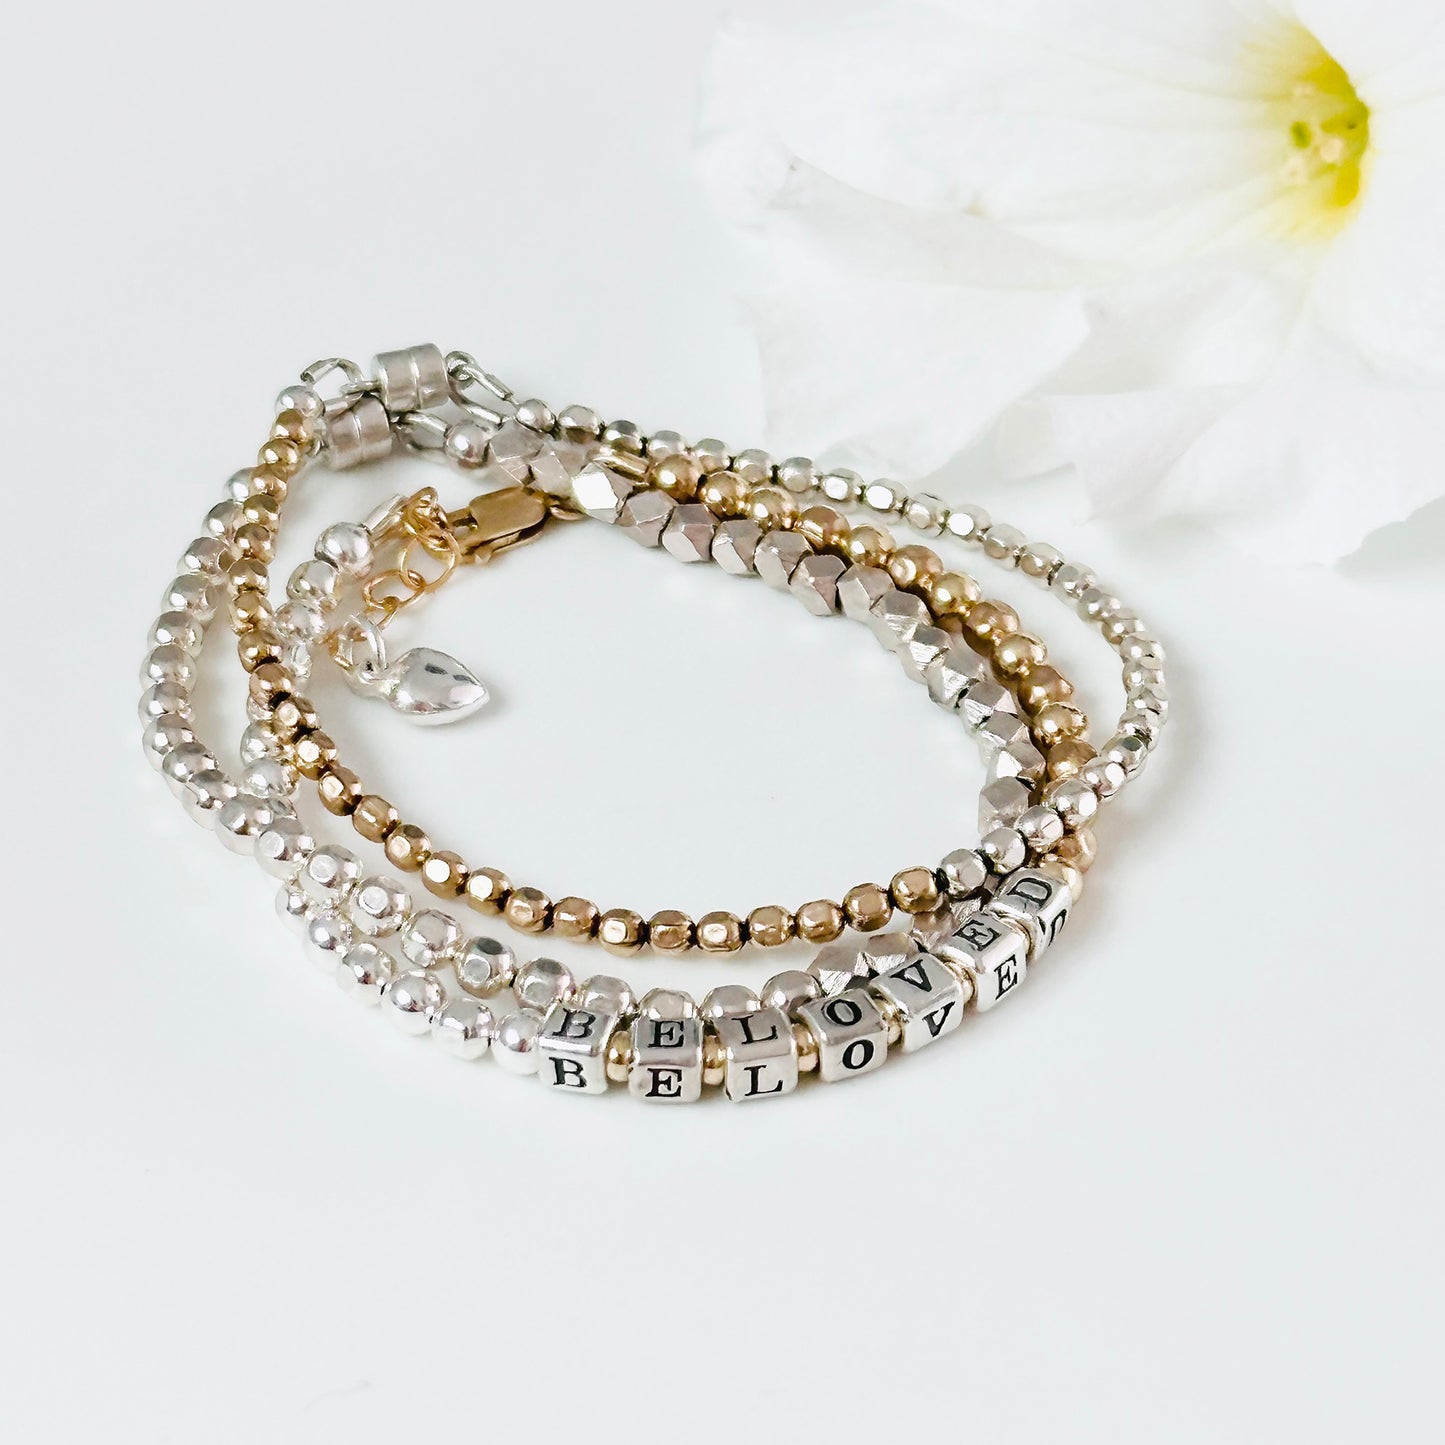 Beloved Mother's Day Bracelet in sterling silver and 14K gold beads  with beaded stacking bracelets in sterling silver and 14k gold